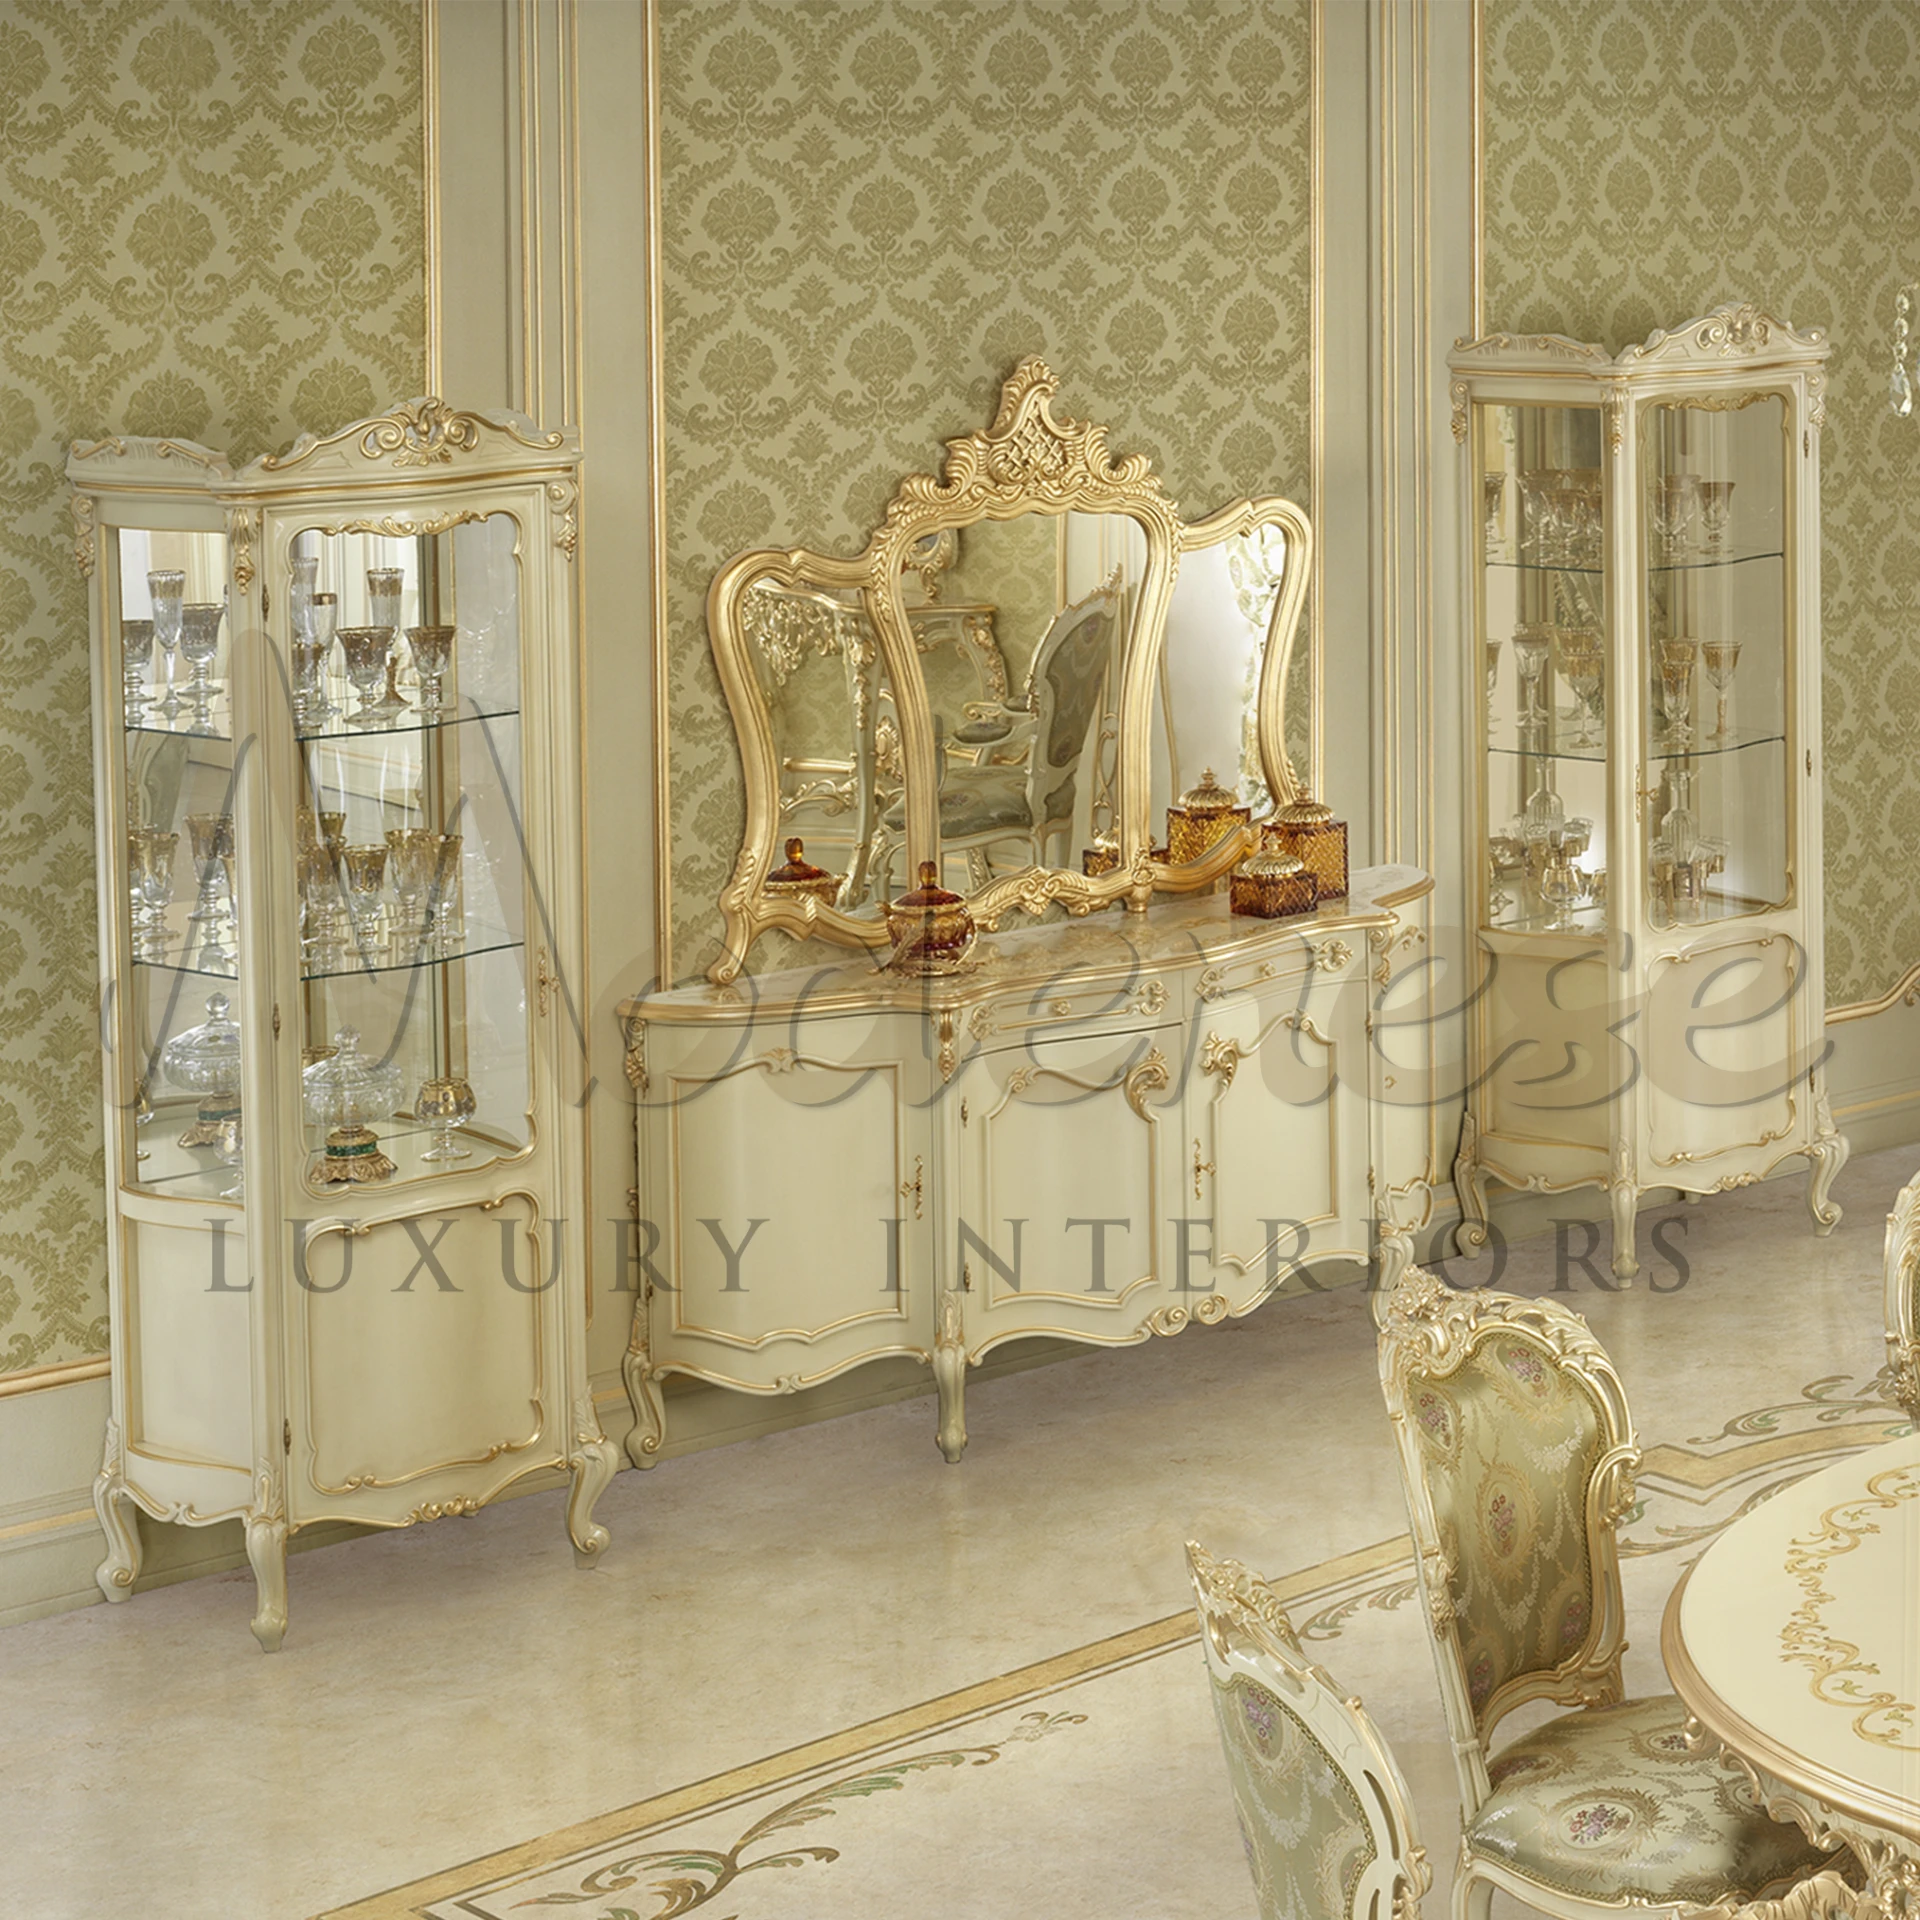 Classic Creame ornate vanity set with mirror and matching single-door display cabinets on either side